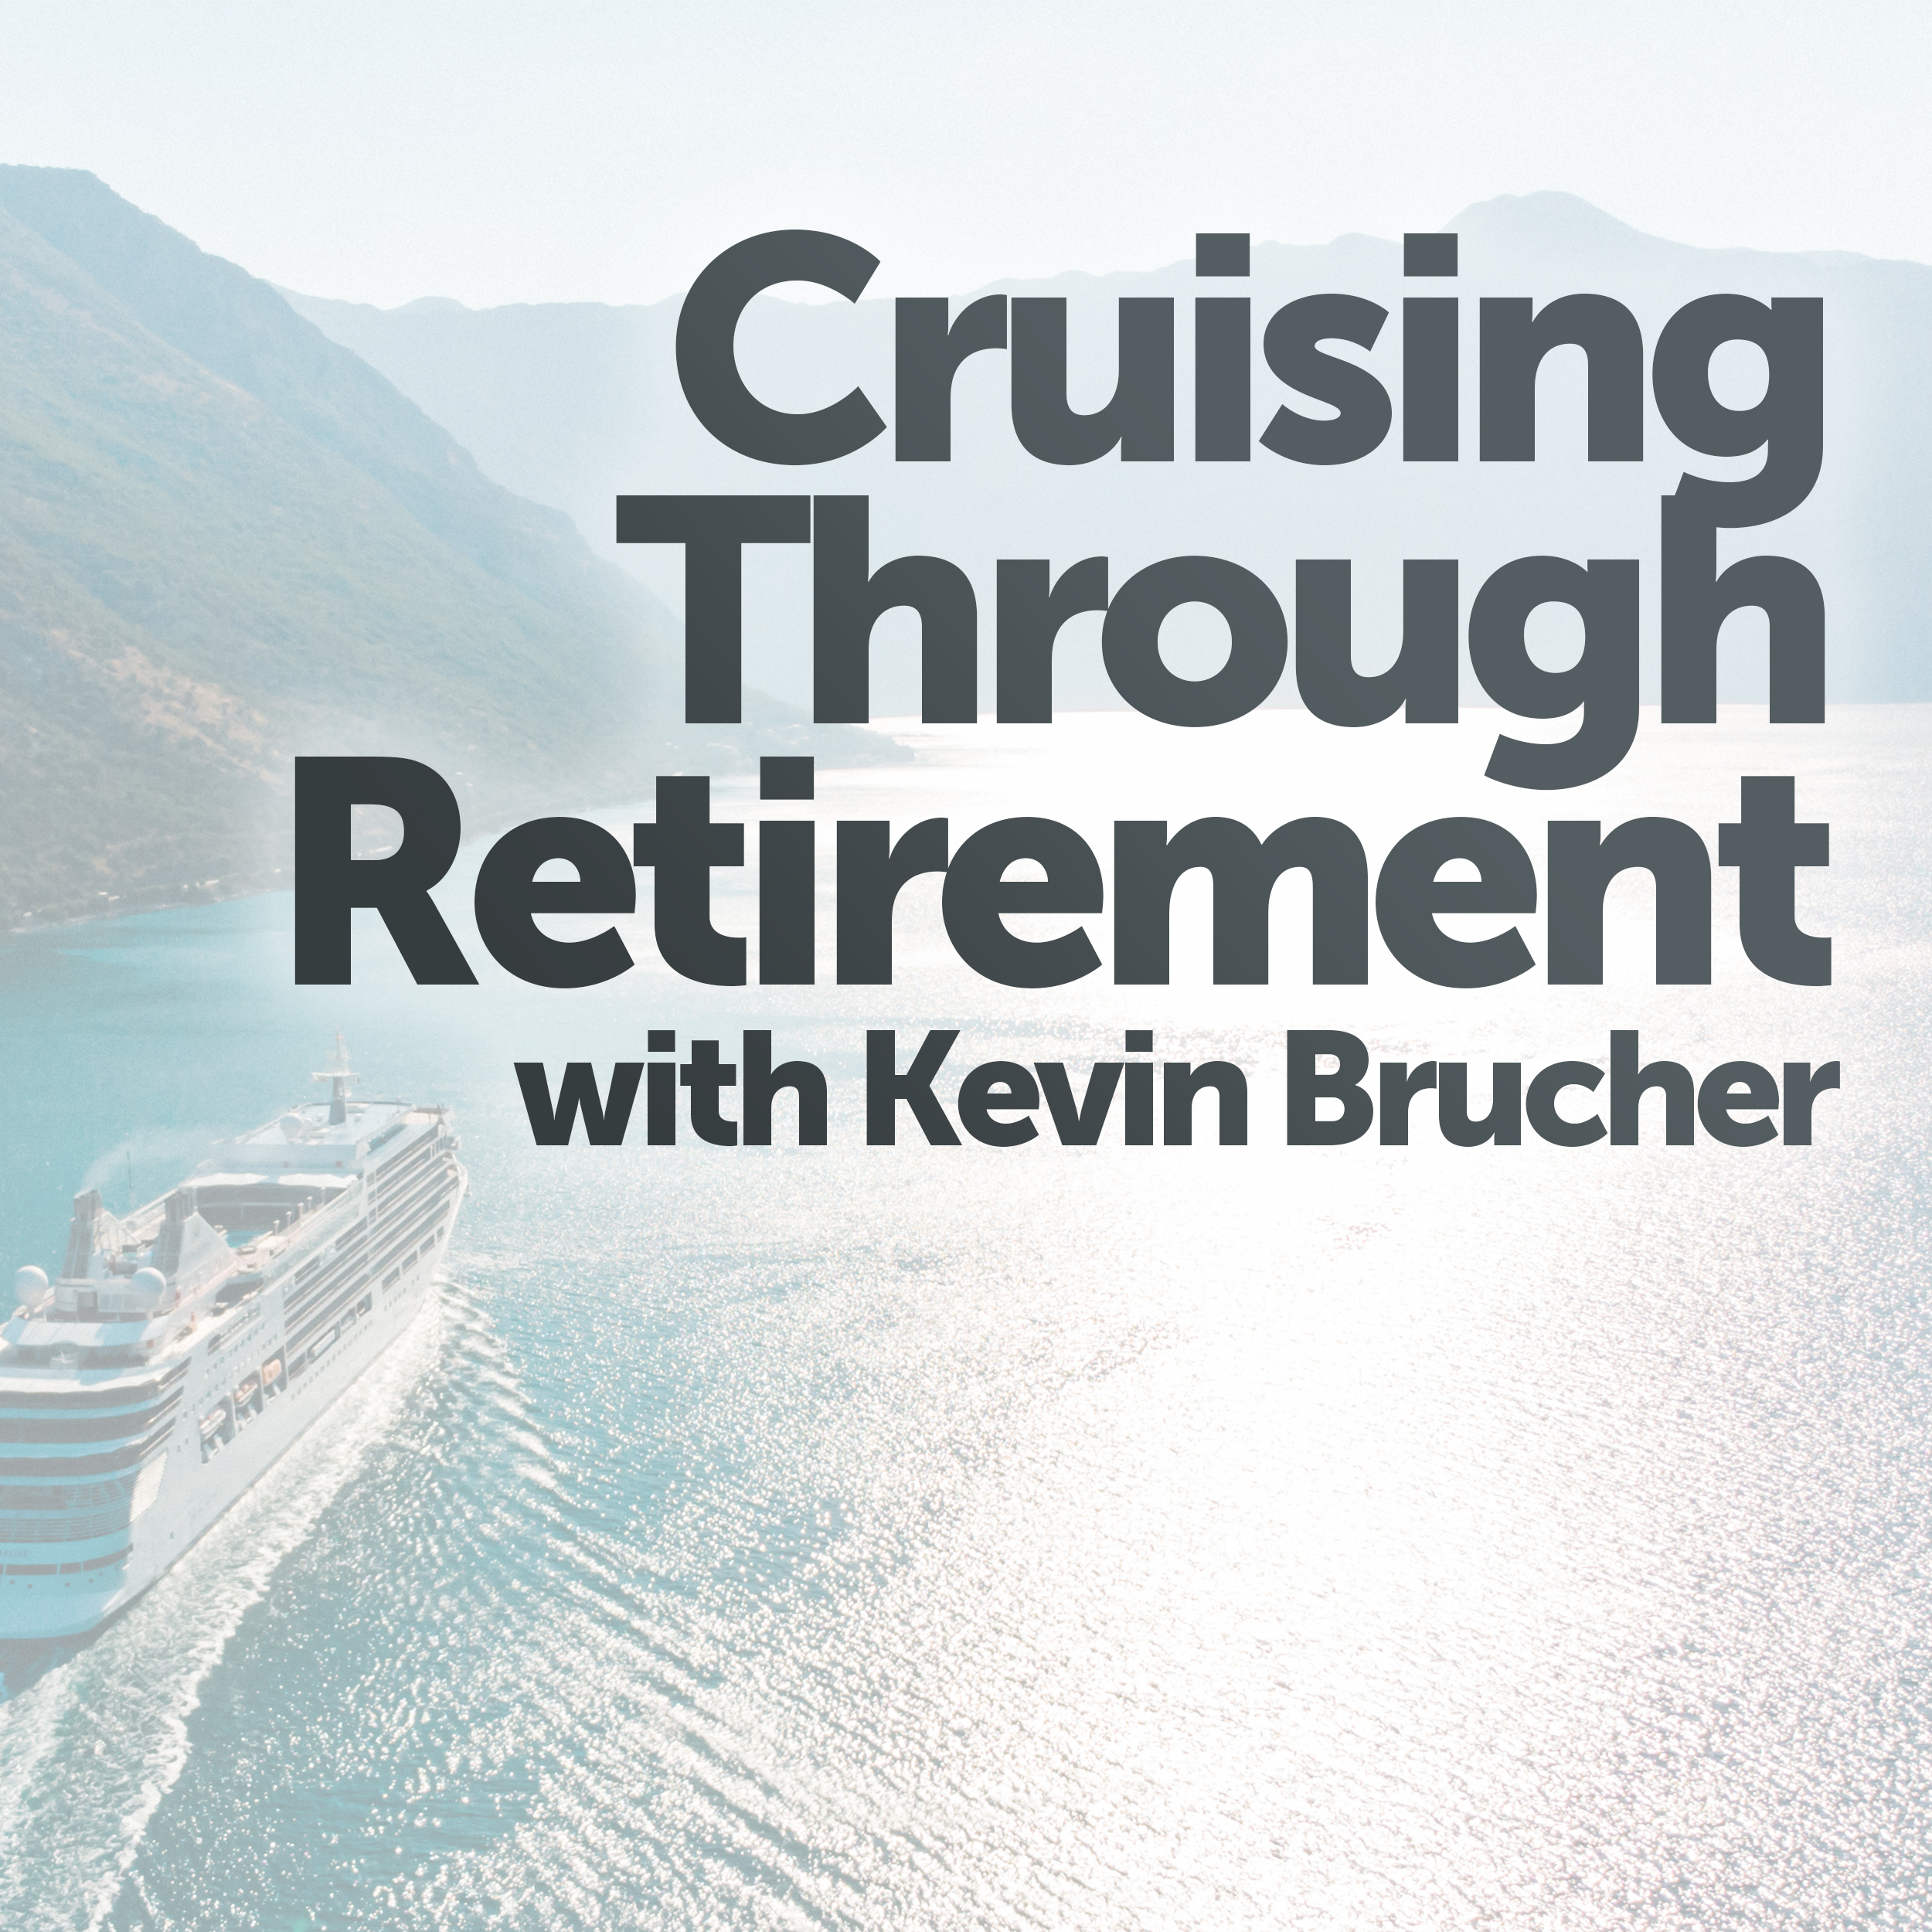 Cruising Through Retirement There are plenty of questions about retirement planning. This week Kevin Brucher tackles some of the most asked questions he gets including will it really cost $300,000 in healthcare costs through my retirement?